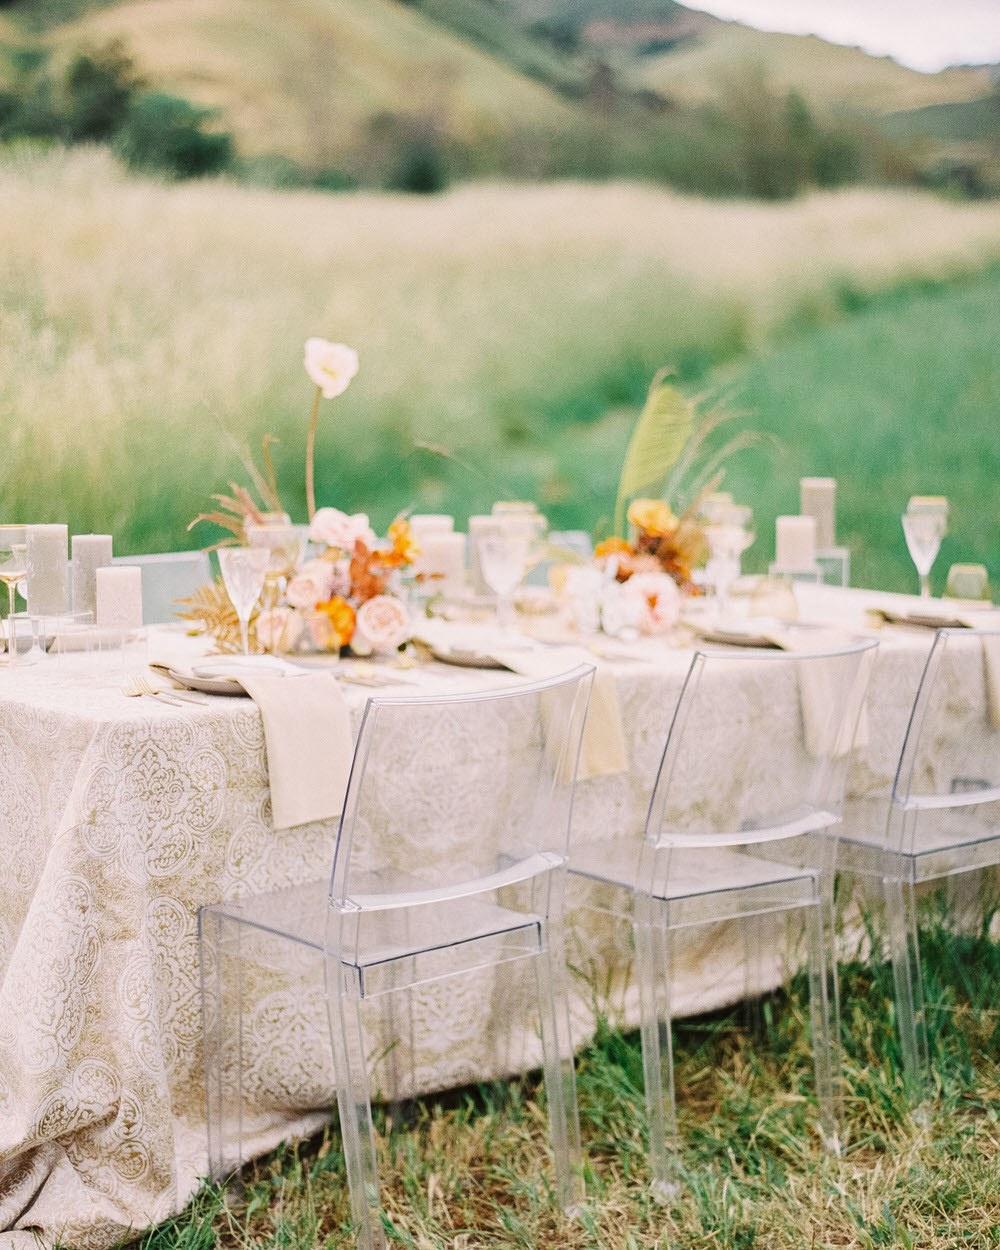 Wedding Chair Rentals to Fit Your Theme